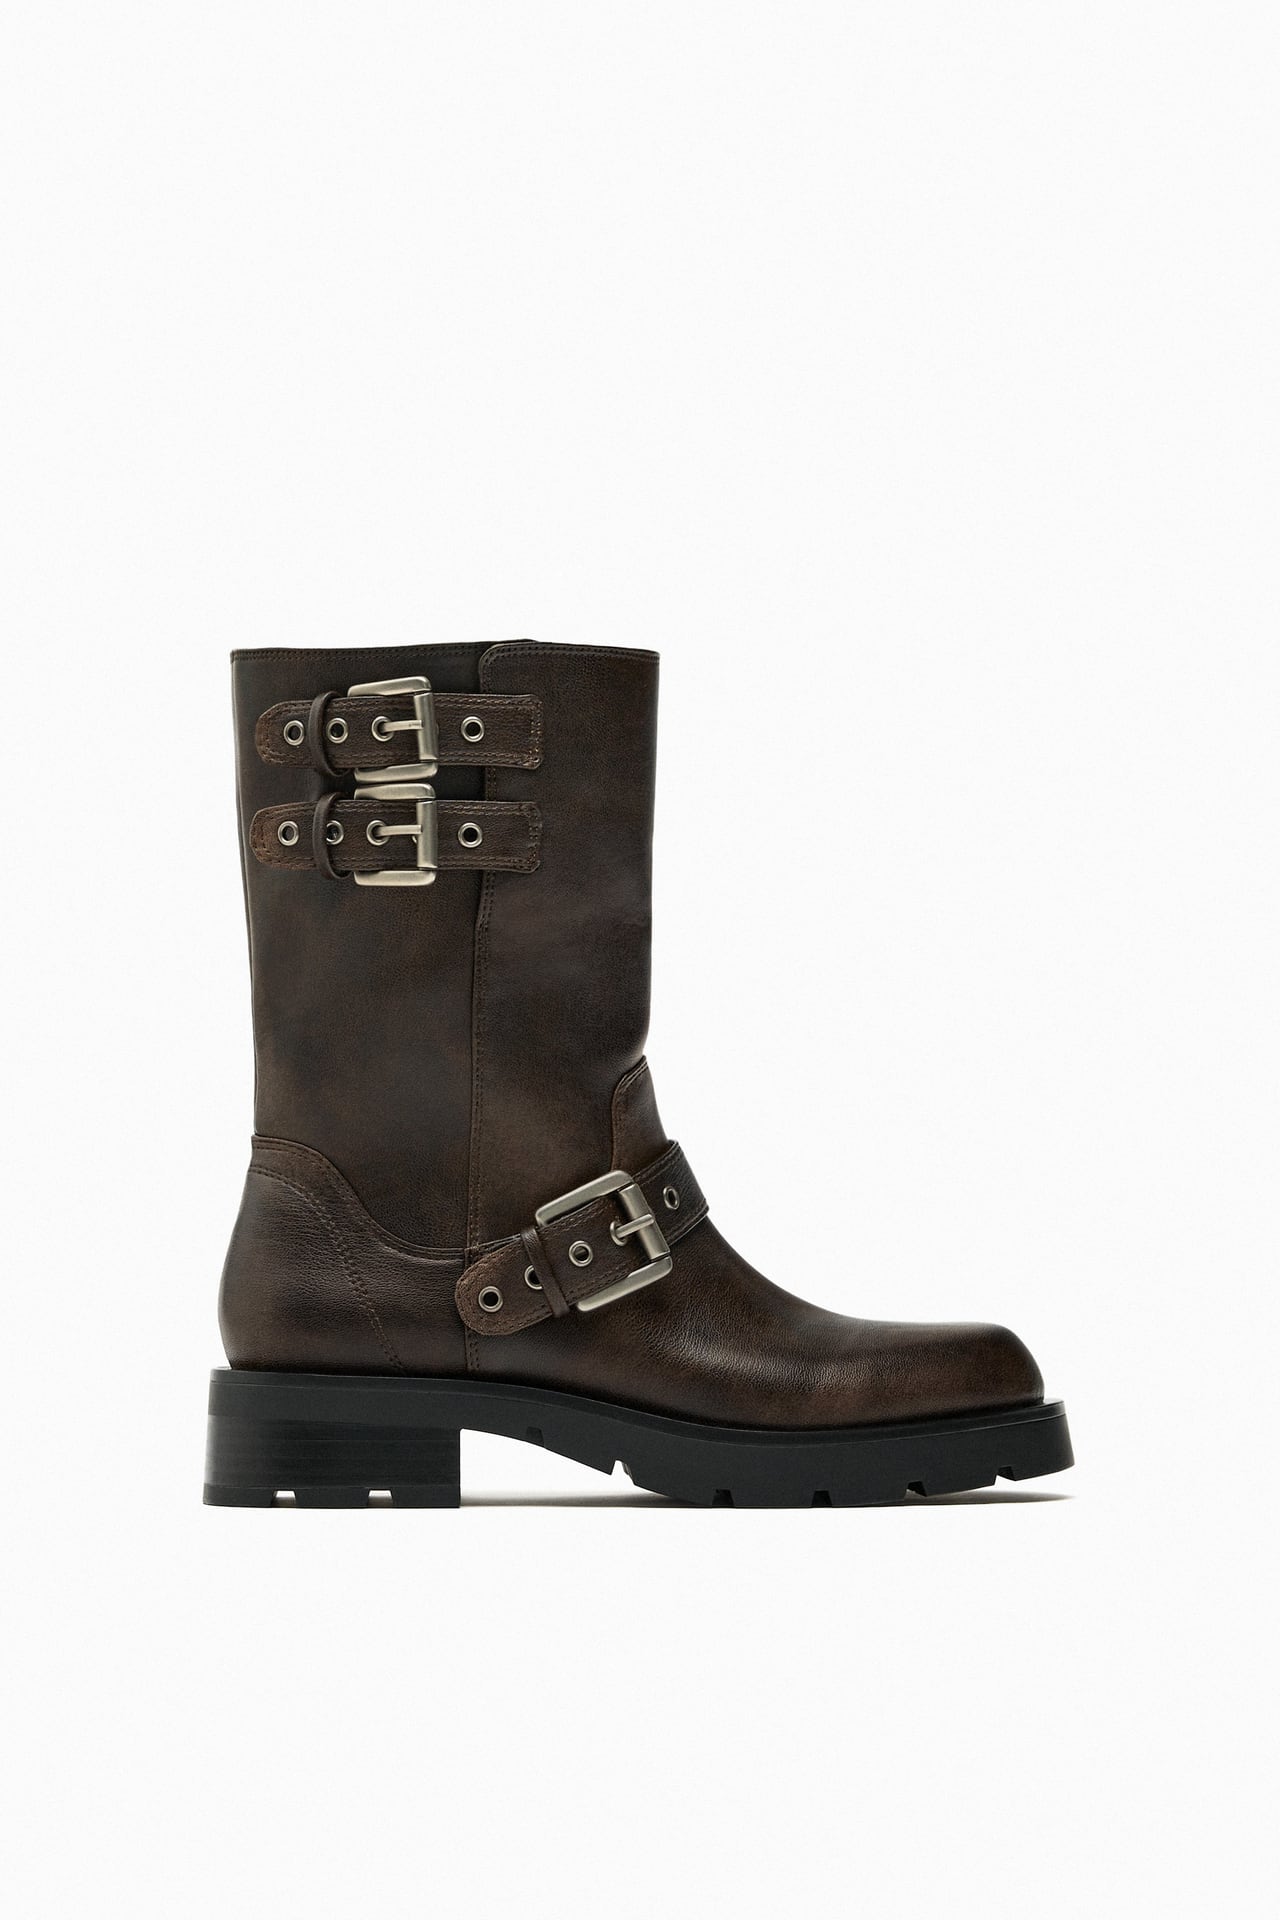 Zara Flat biker ankle boots with buckles
